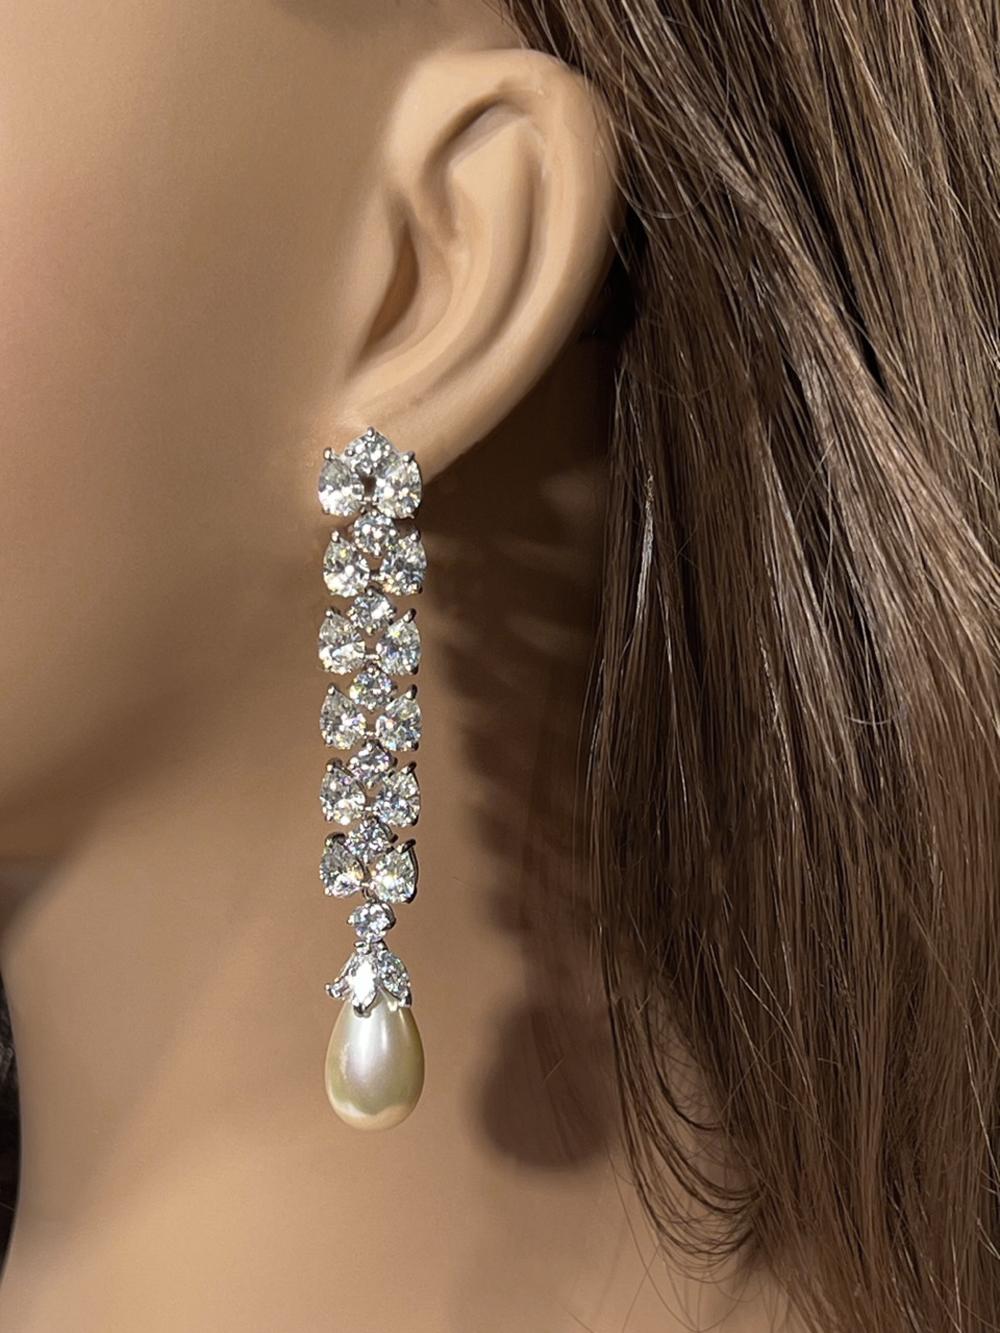 Vintage Costume Jewelry Diamanté Pearl Sterling Long Dangly Earrings Made With Diamond Quality Pear Shaped Cubic Zirconia and ManMade Pearls Stunning flexible 3.5 inches long for pierced ears.